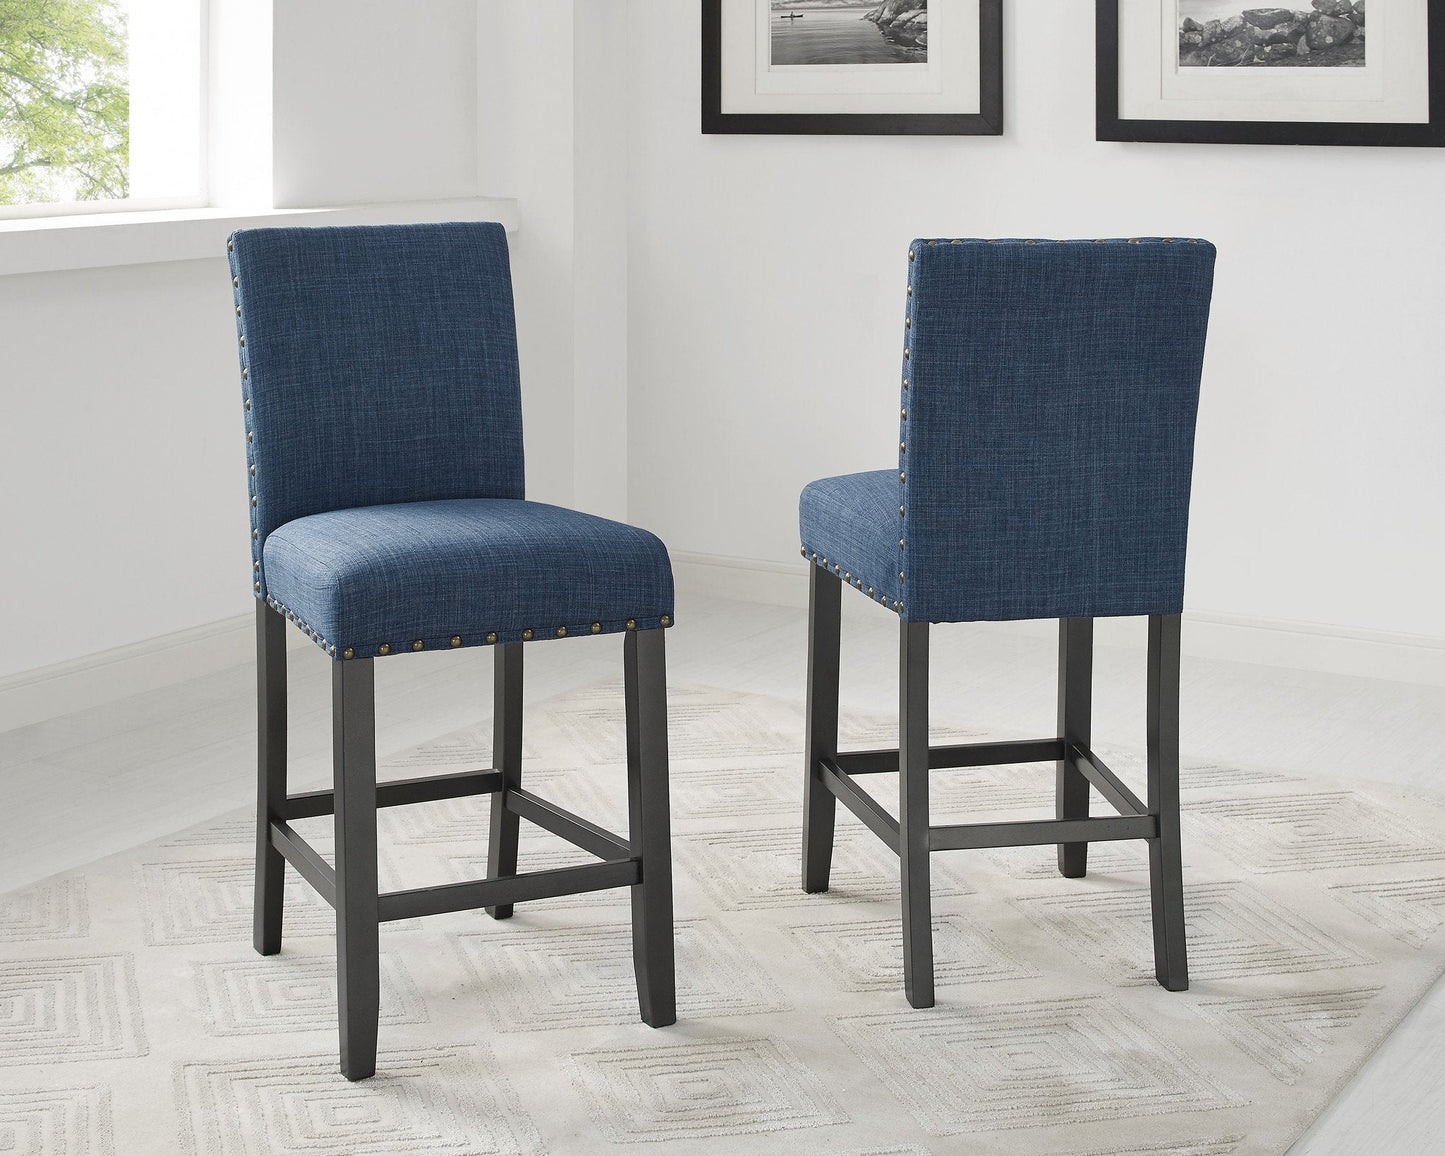 Biony Espresso Wood Counter Height Dining Set with Blue Fabric Nailhead Stools